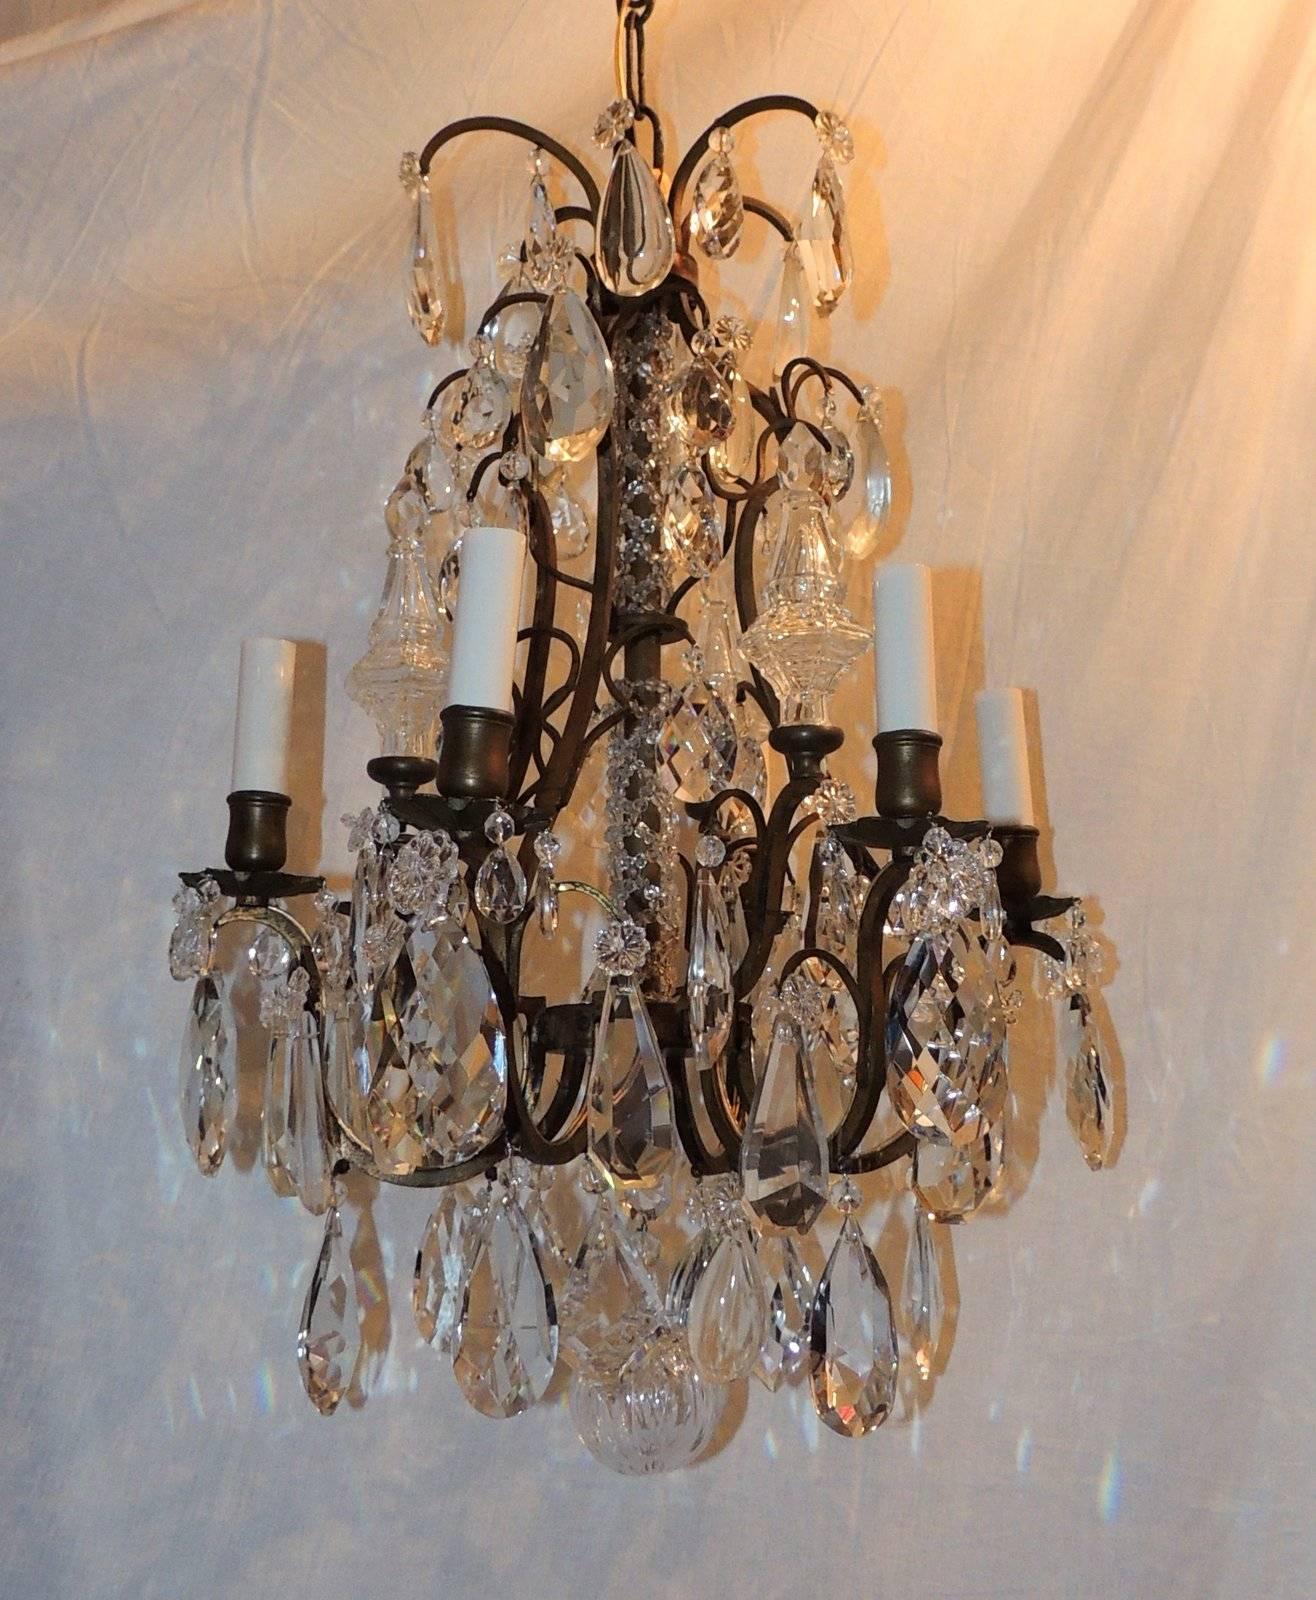 Wonderful aged bronze chandelier with crystal beaded center, six lights with large prism crystals and Obelisk spires accenting the chandelier

Measures: 24" H x 16" W.